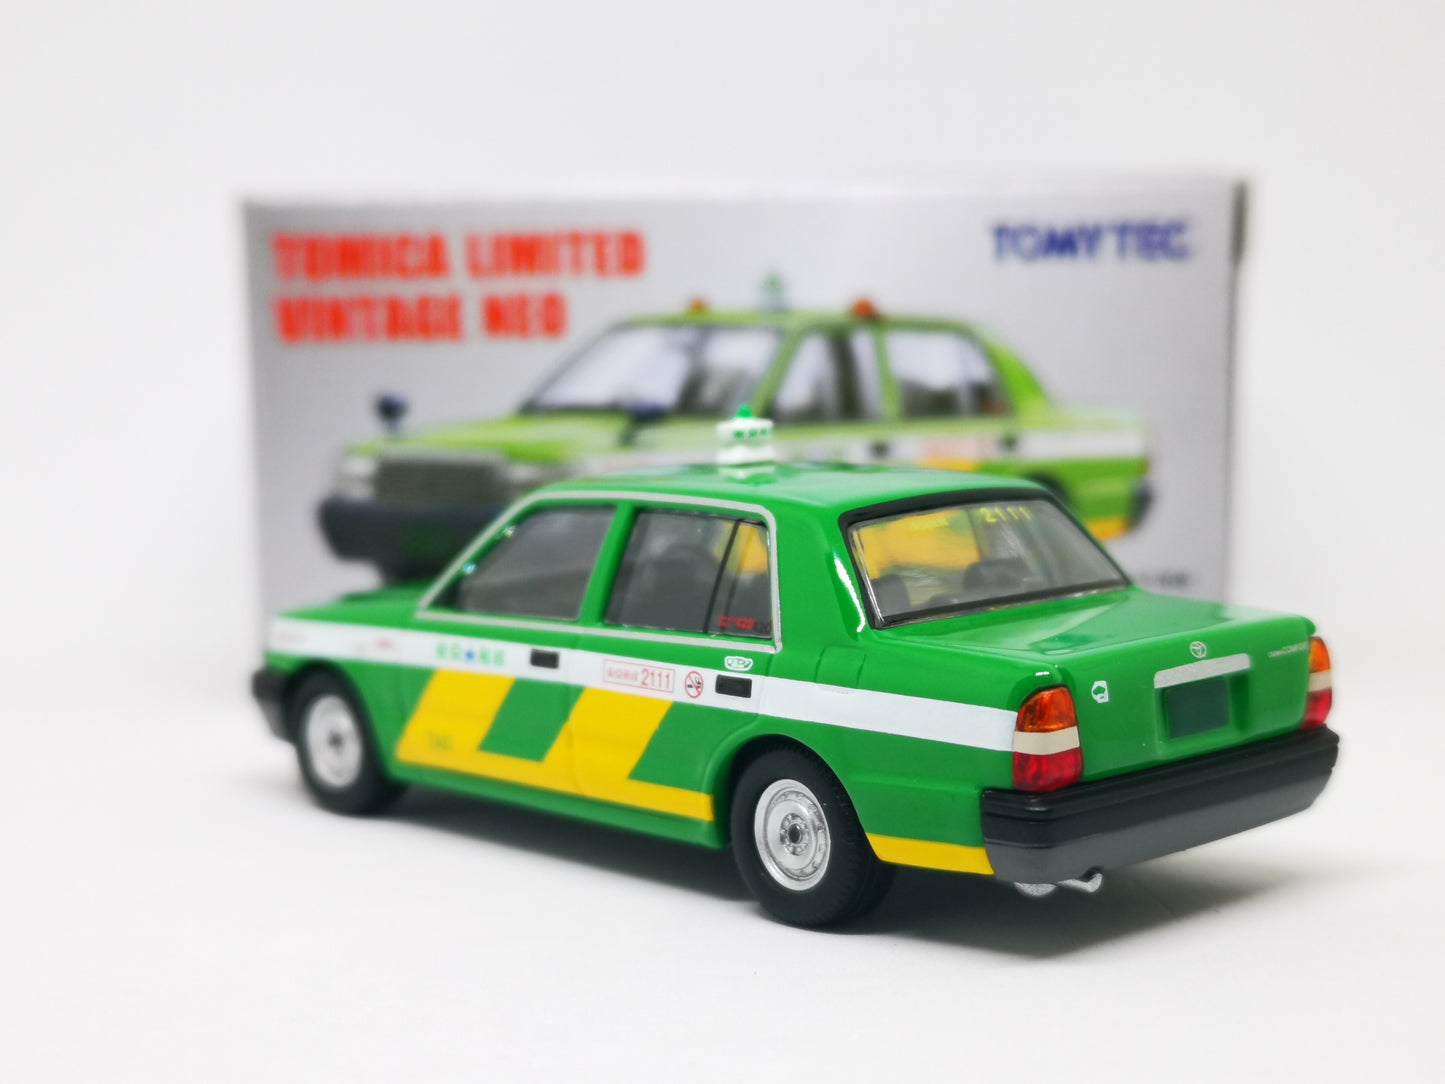 Tomica Limited Vintage Neo LV-N218a TOYOTA CROWN COMFORT Tokyo
Musen Taxi Green